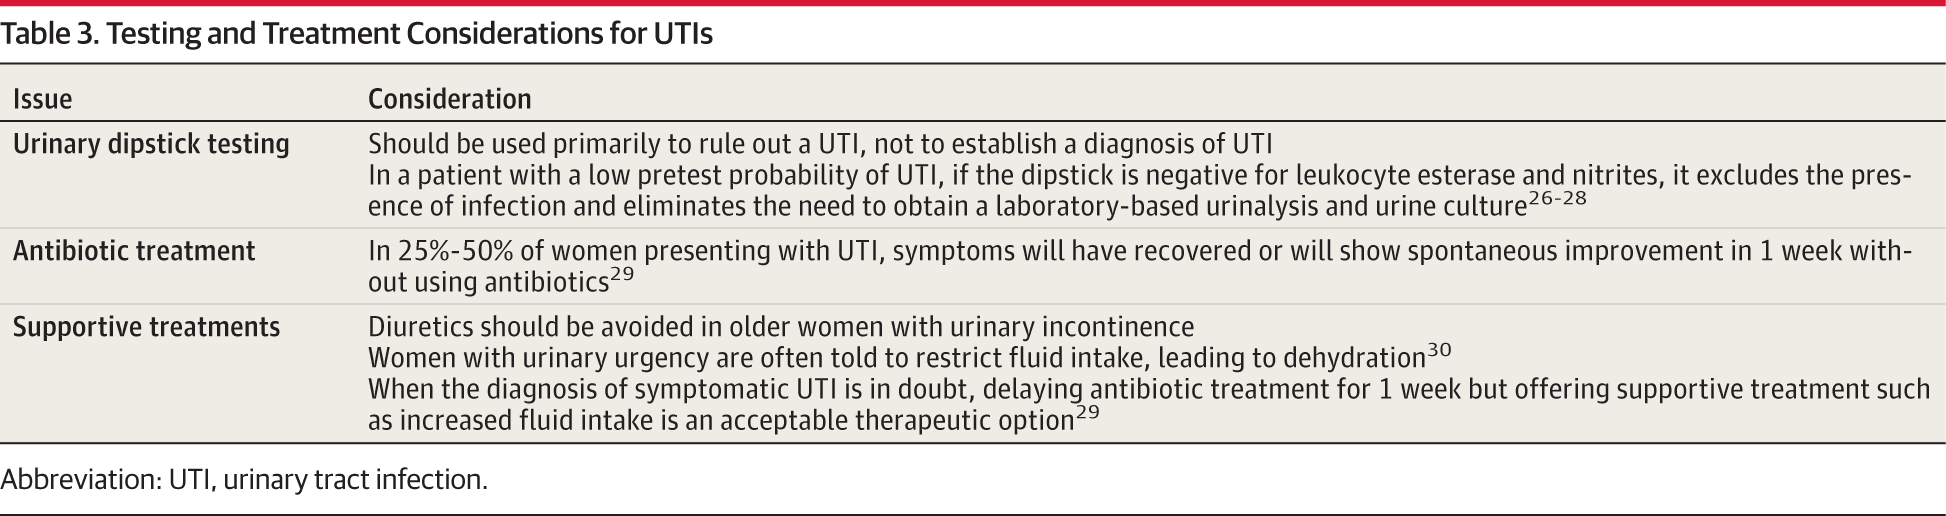 Urinary Tract Infections in Older Women: A Clinical Review